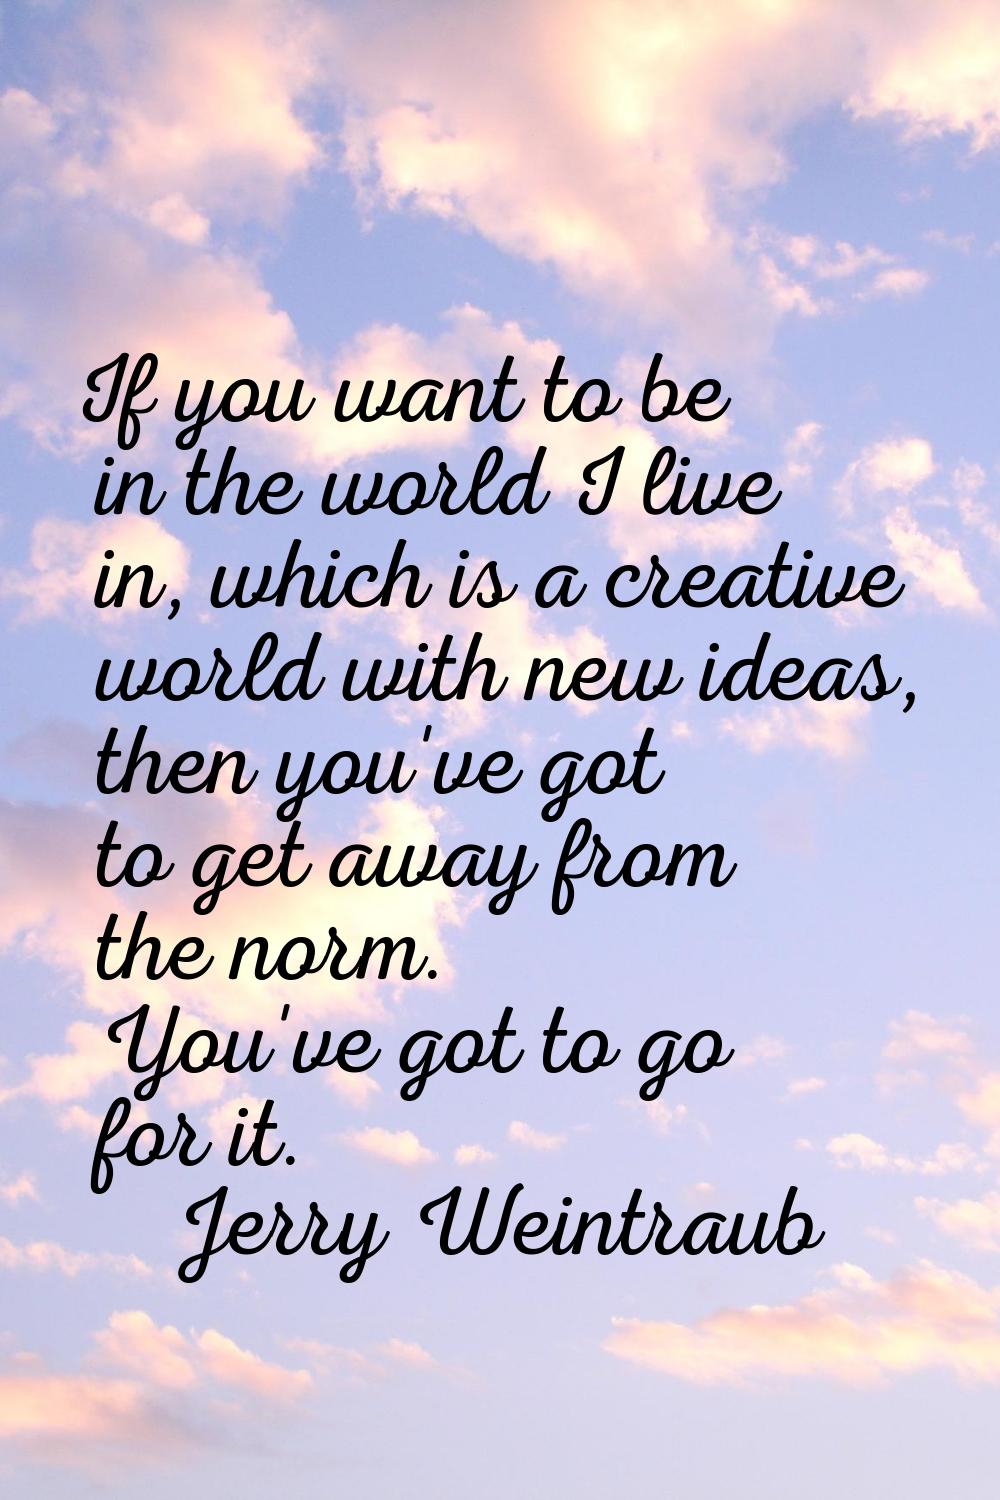 If you want to be in the world I live in, which is a creative world with new ideas, then you've got